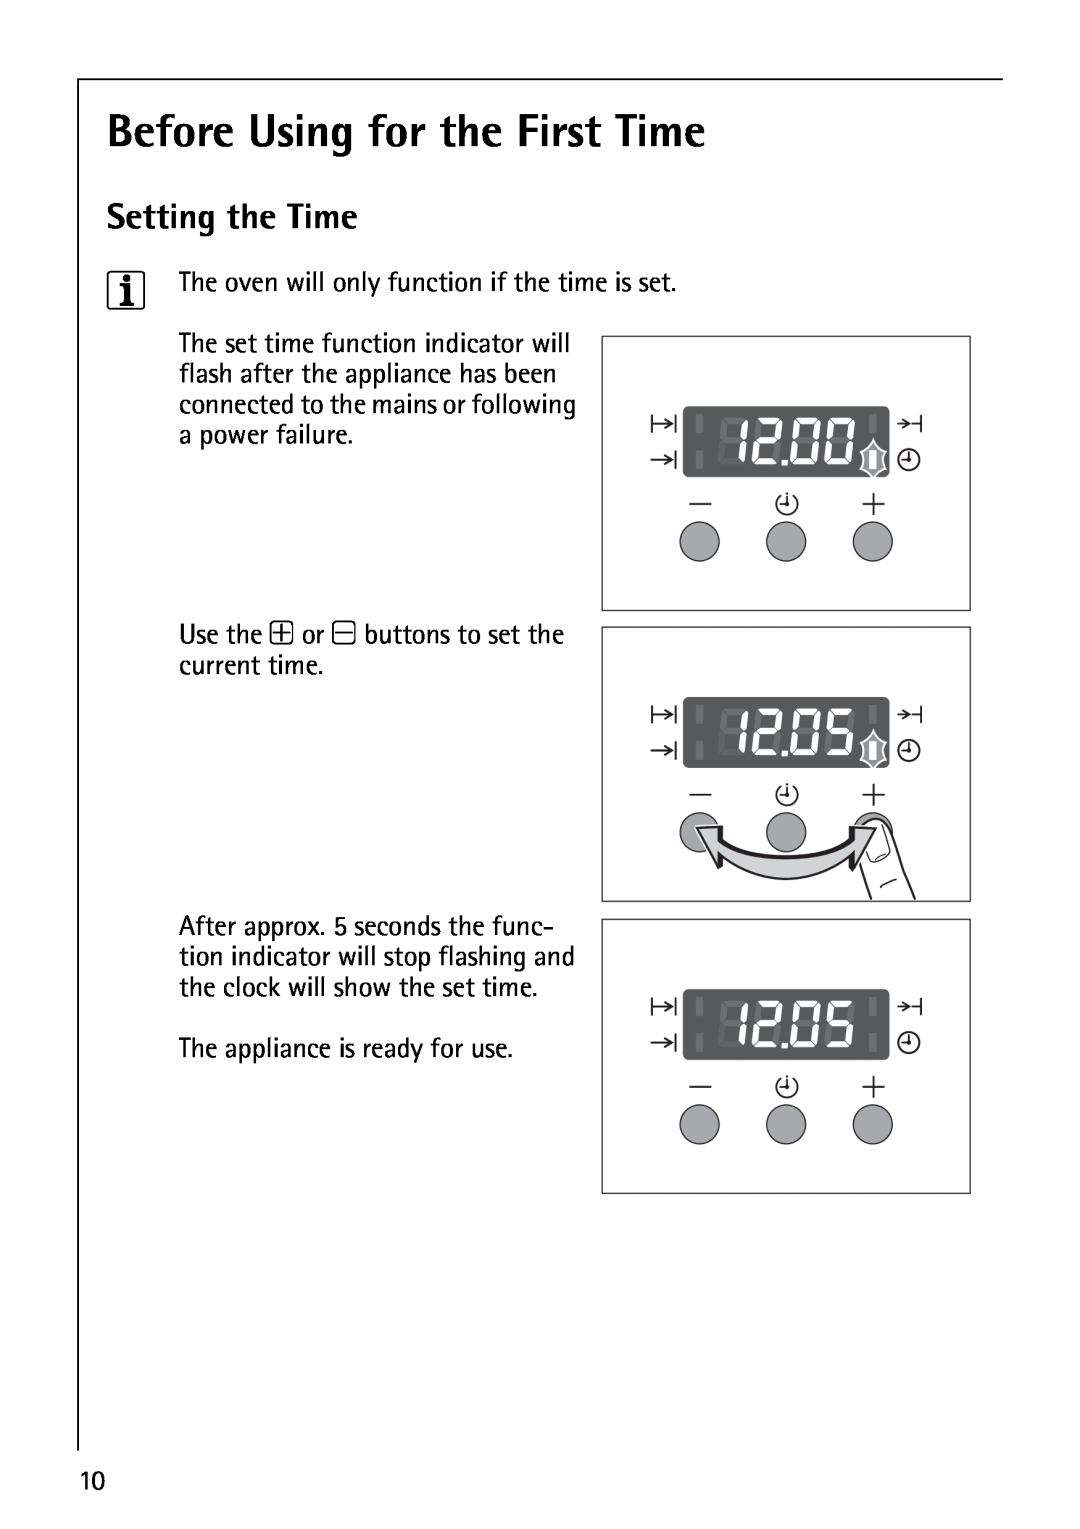 Electrolux B1100-3 manual Before Using for the First Time, Setting the Time 